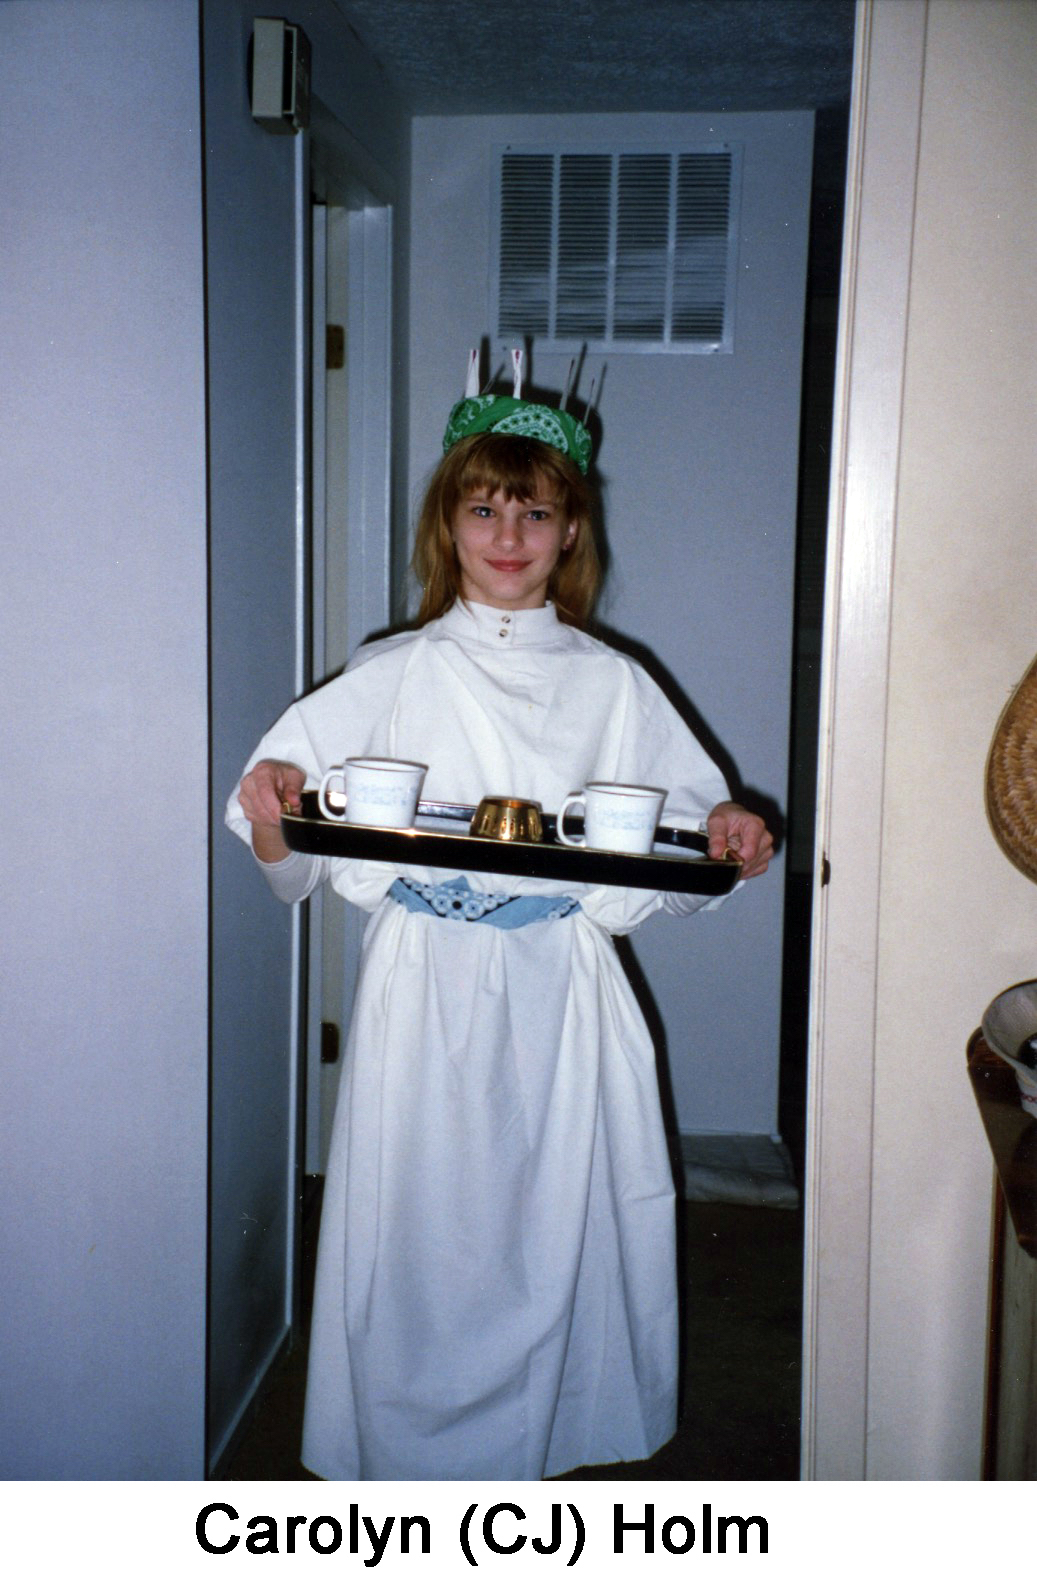 CJ is carrying a tray with two cups and wearing a crown with imitation candles.